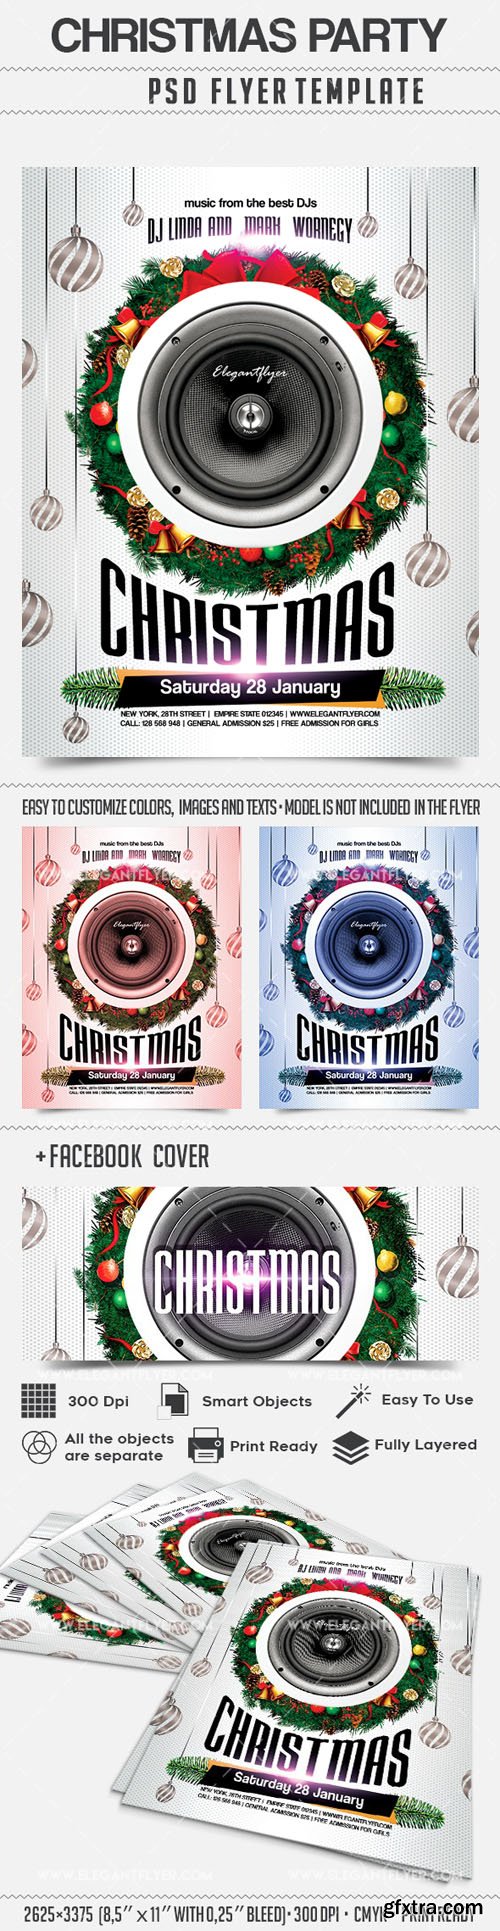 Christmas Party PSD Flyer Template + Facebook Cover